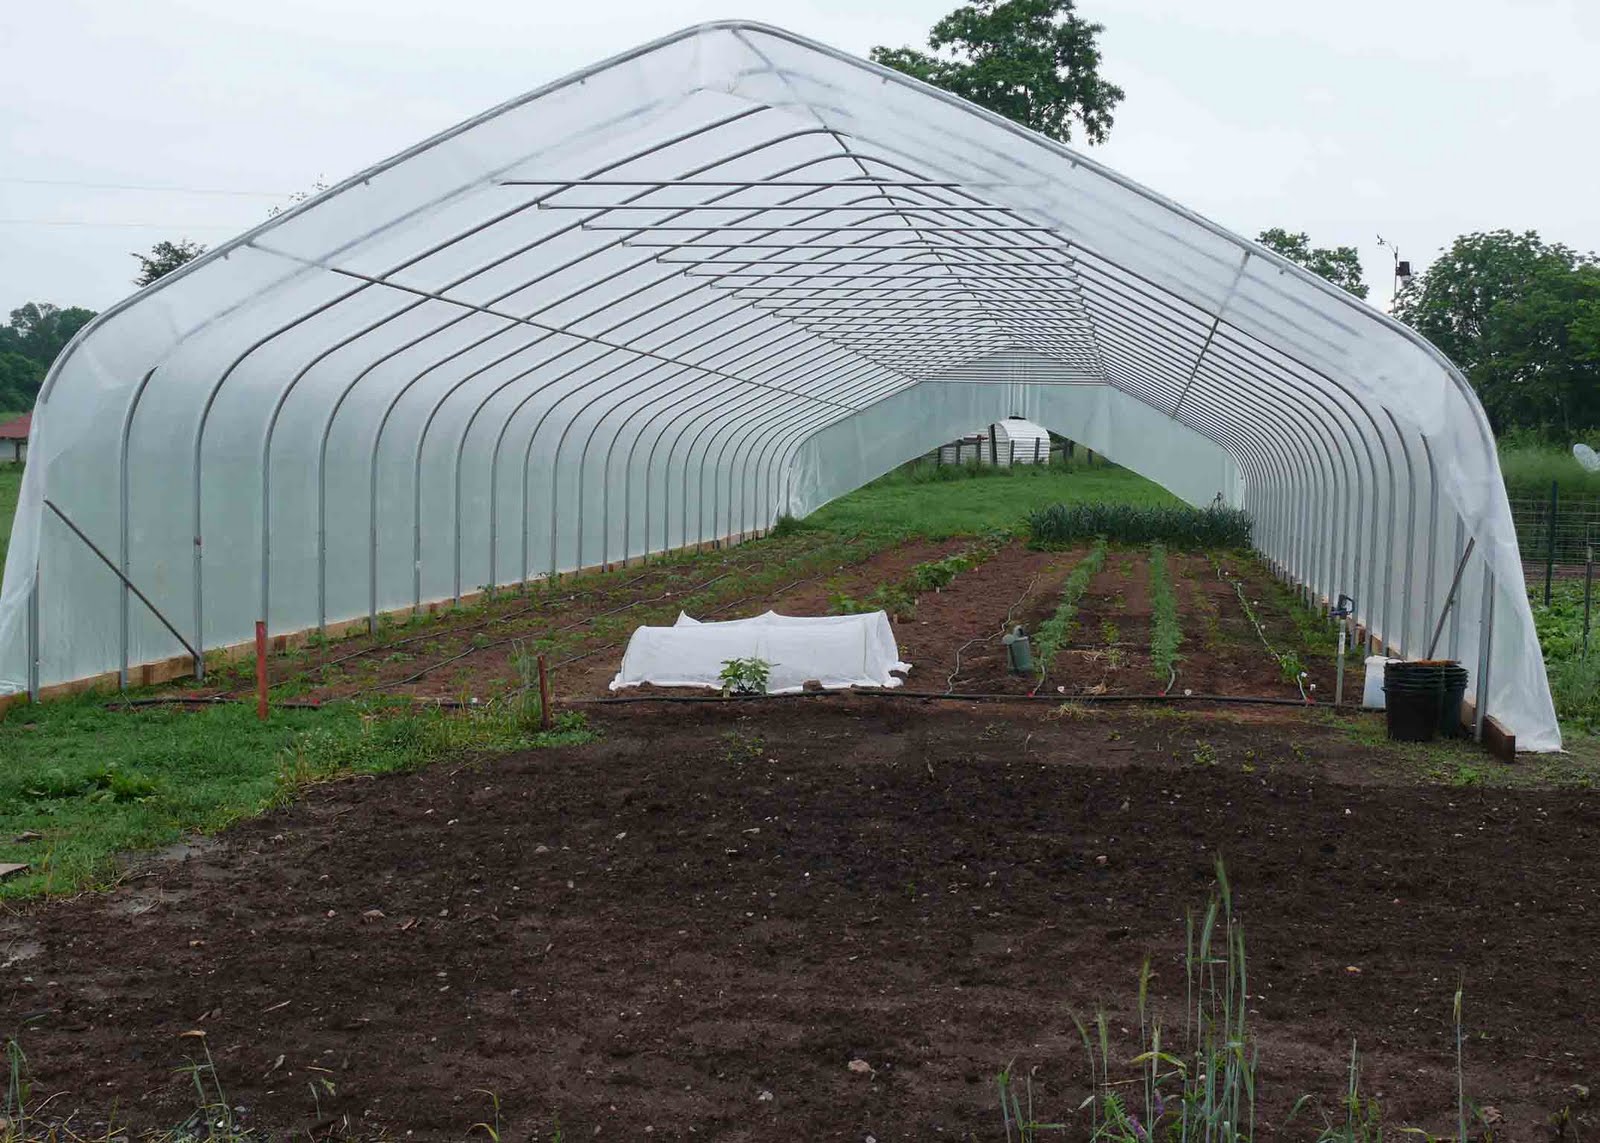 Whitmore Farm: HOOP house heaven! (or why cold greenhouses are COOL!)